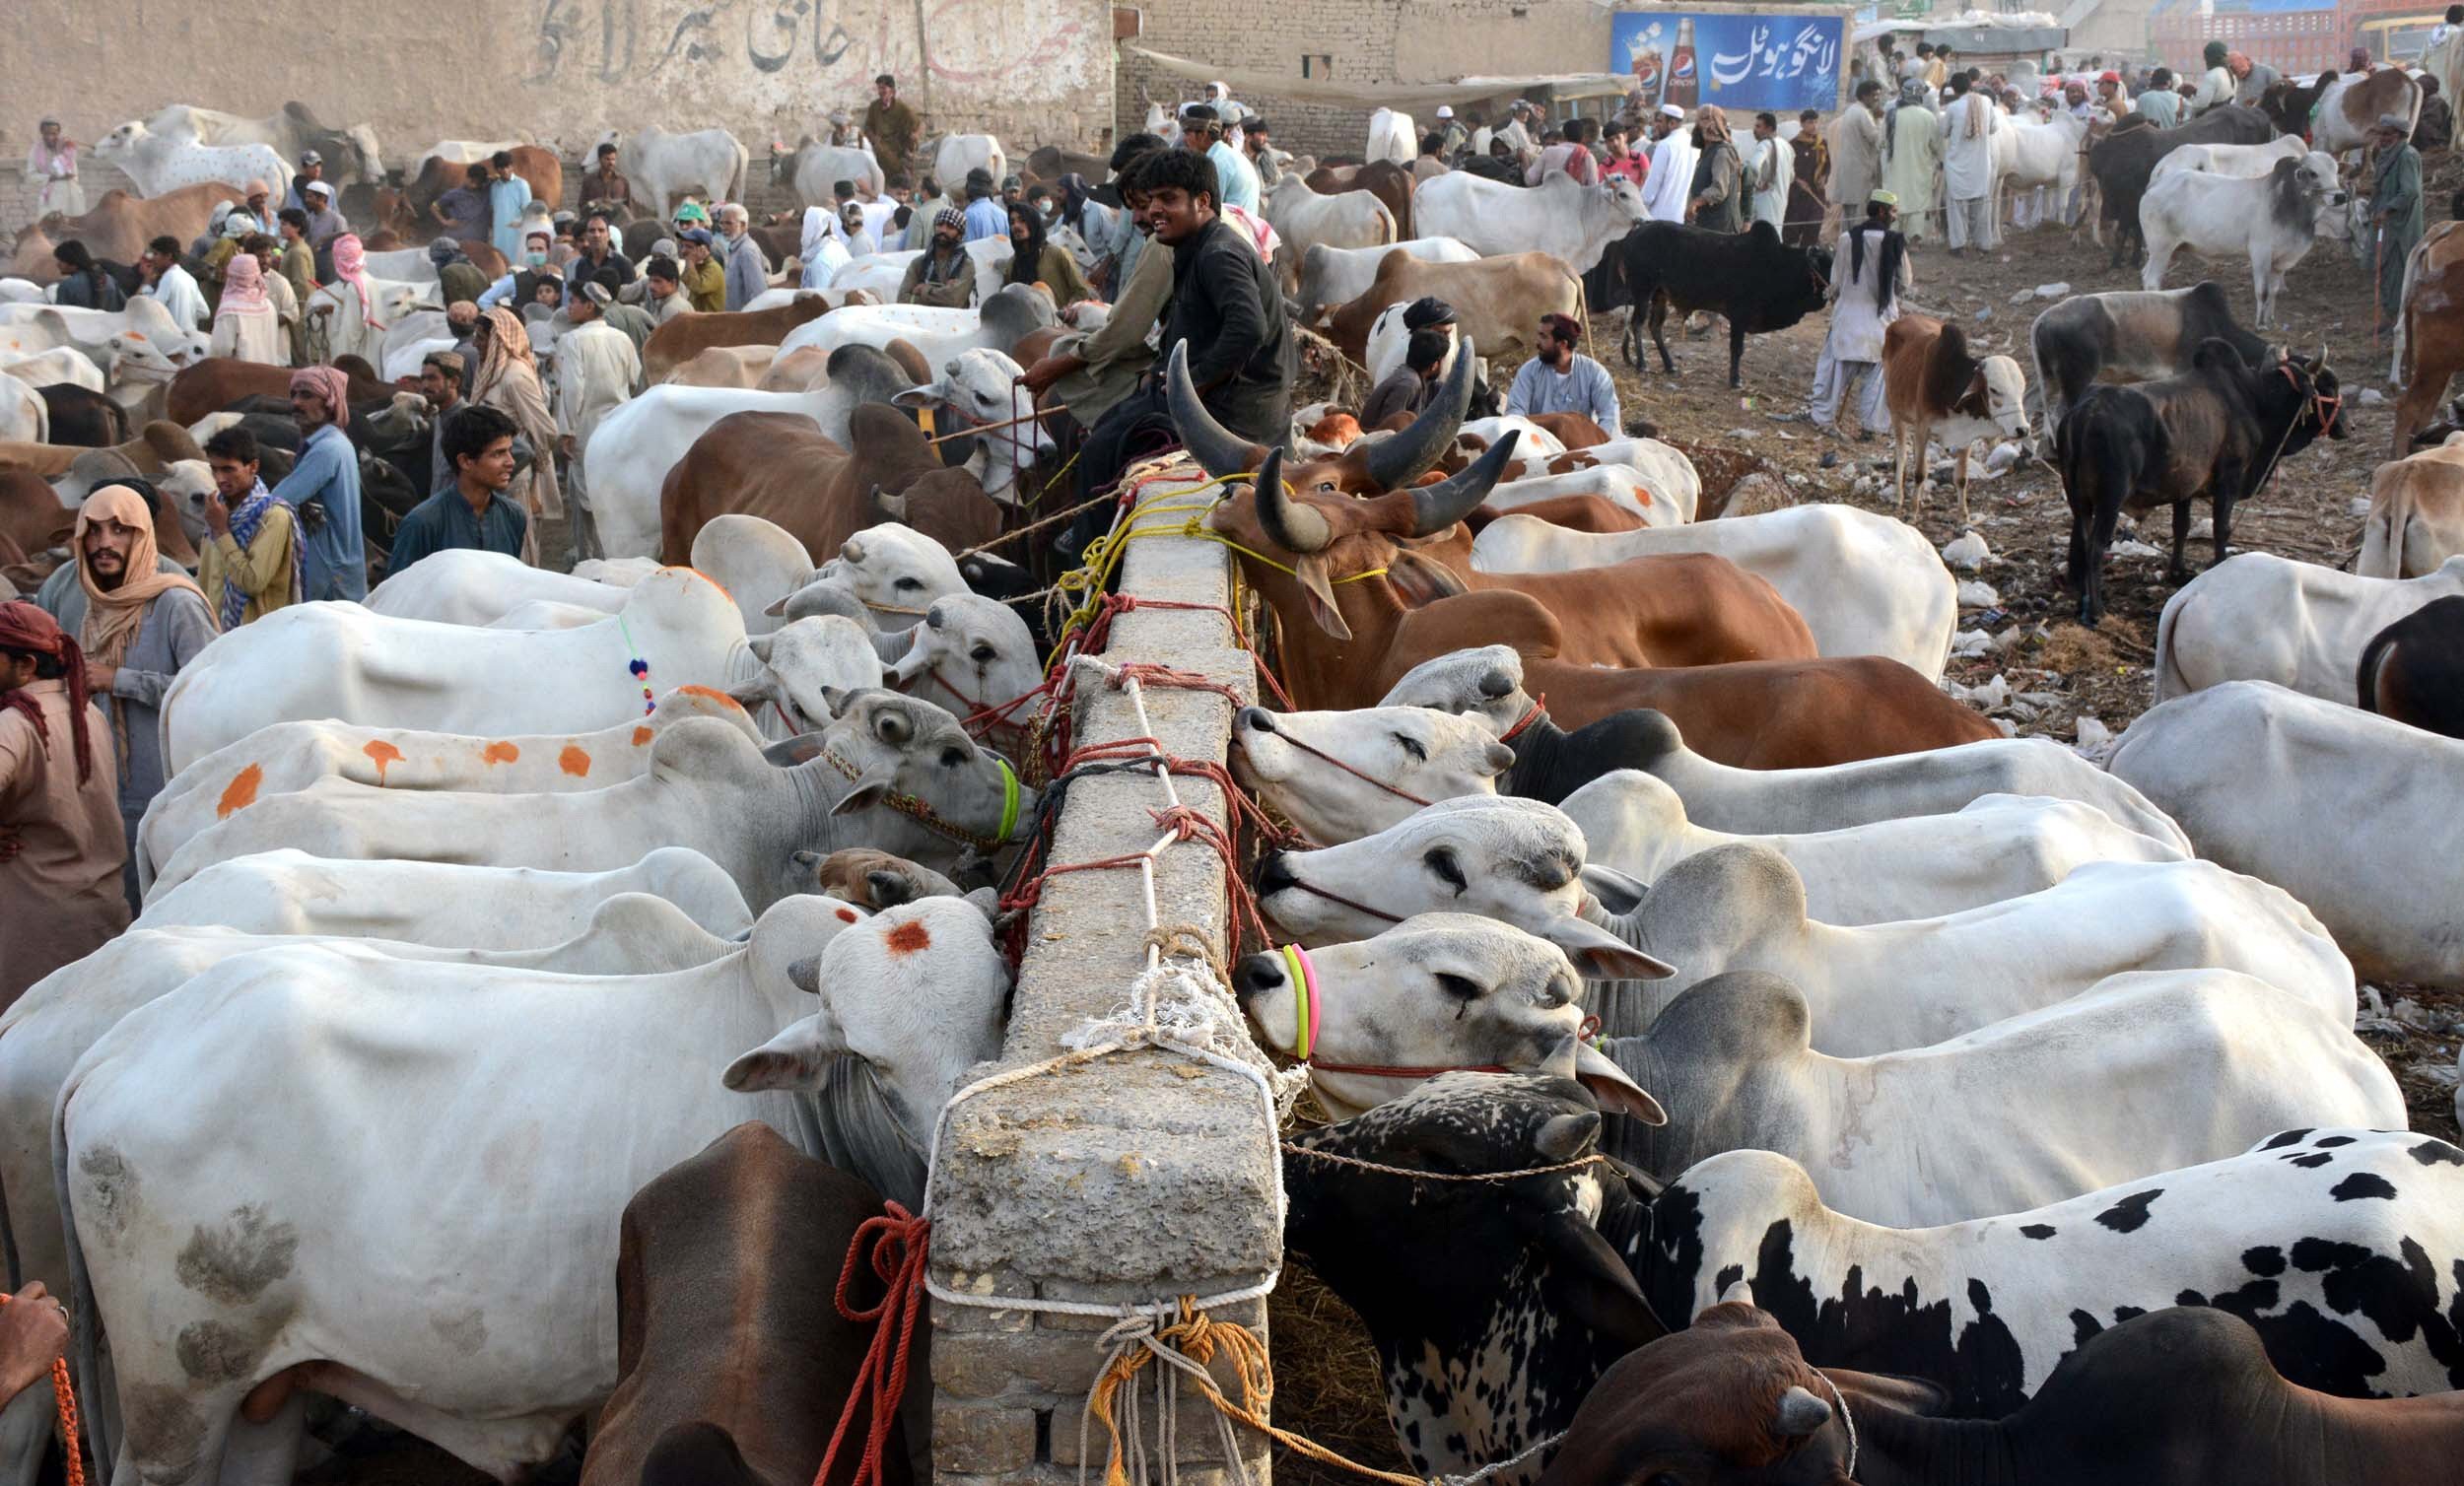 039 restrictions on cattle markets amid pandemic do not apply to those set up for eidul azha 039 photo express